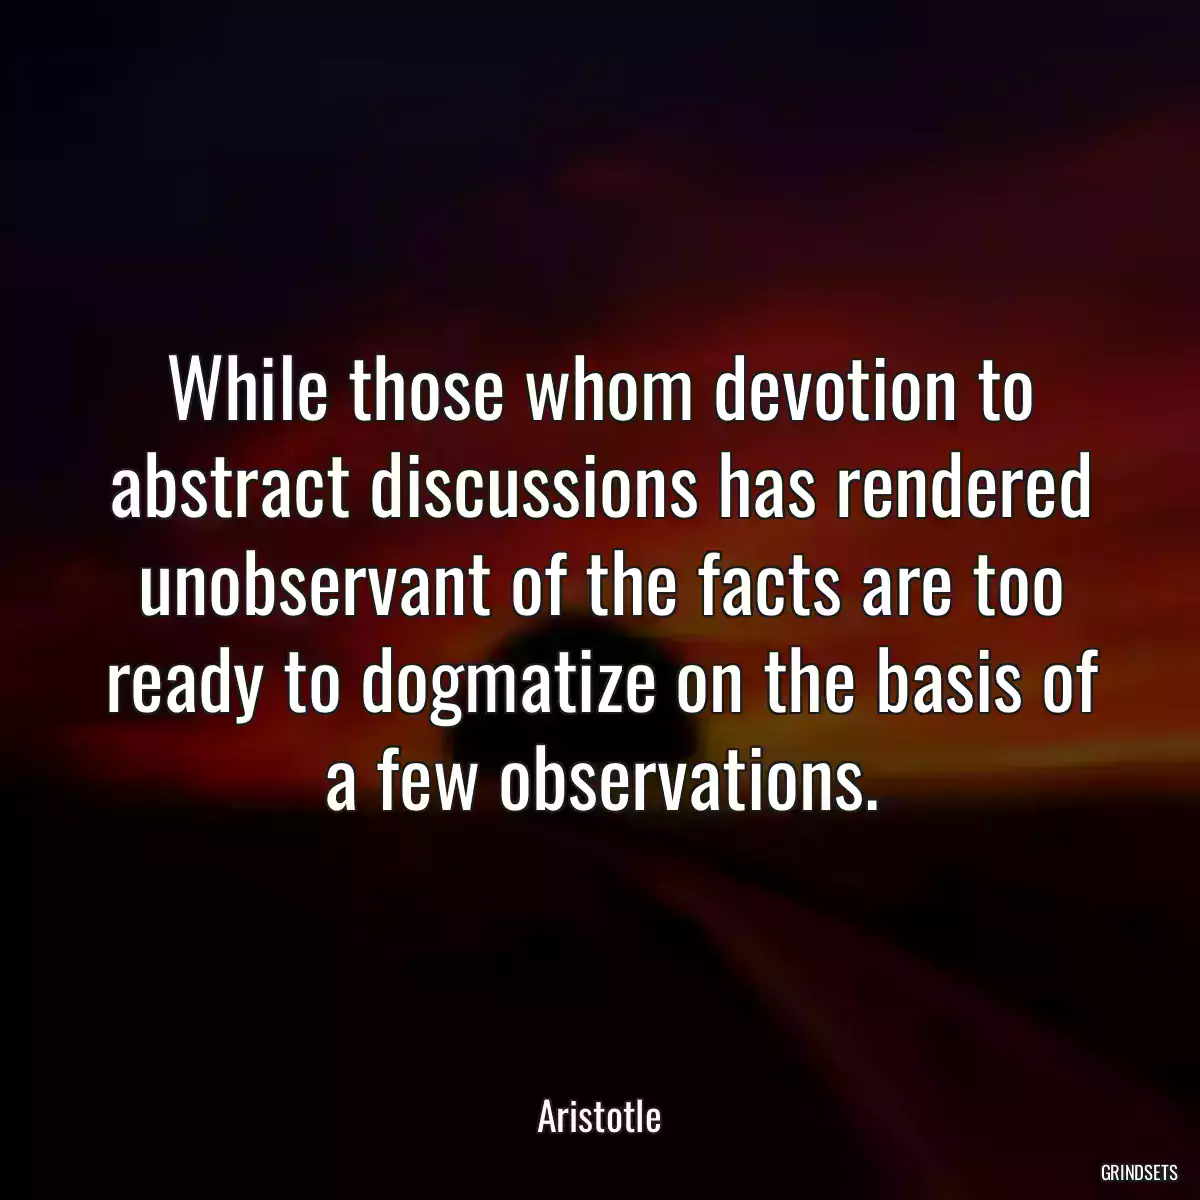 While those whom devotion to abstract discussions has rendered unobservant of the facts are too ready to dogmatize on the basis of a few observations.